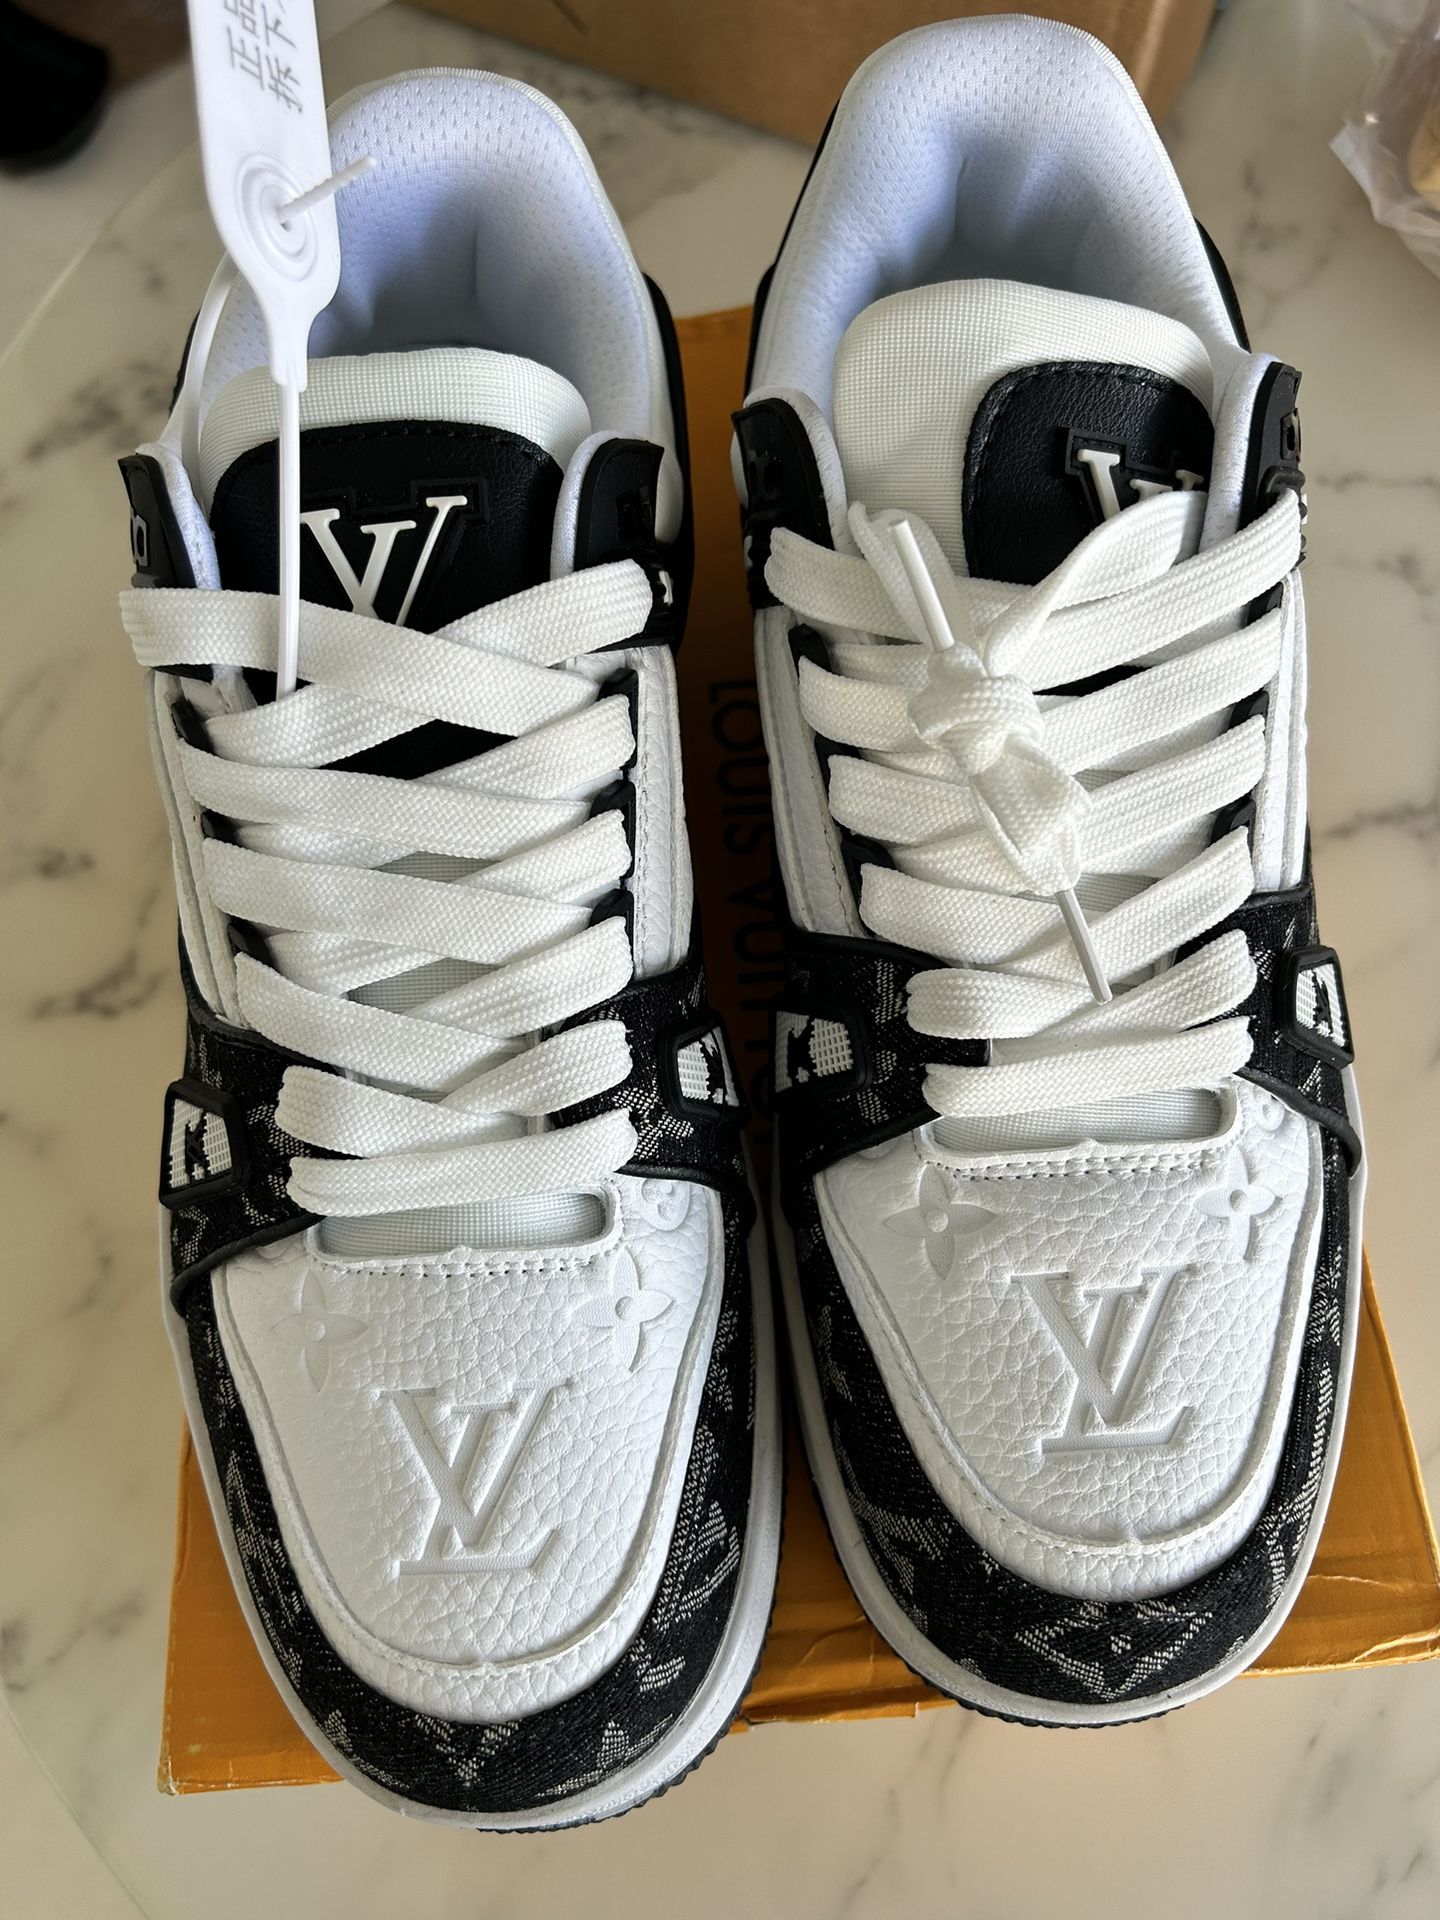 Louis Vuitton Time Out Sneaker for Sale in Miami, FL - OfferUp